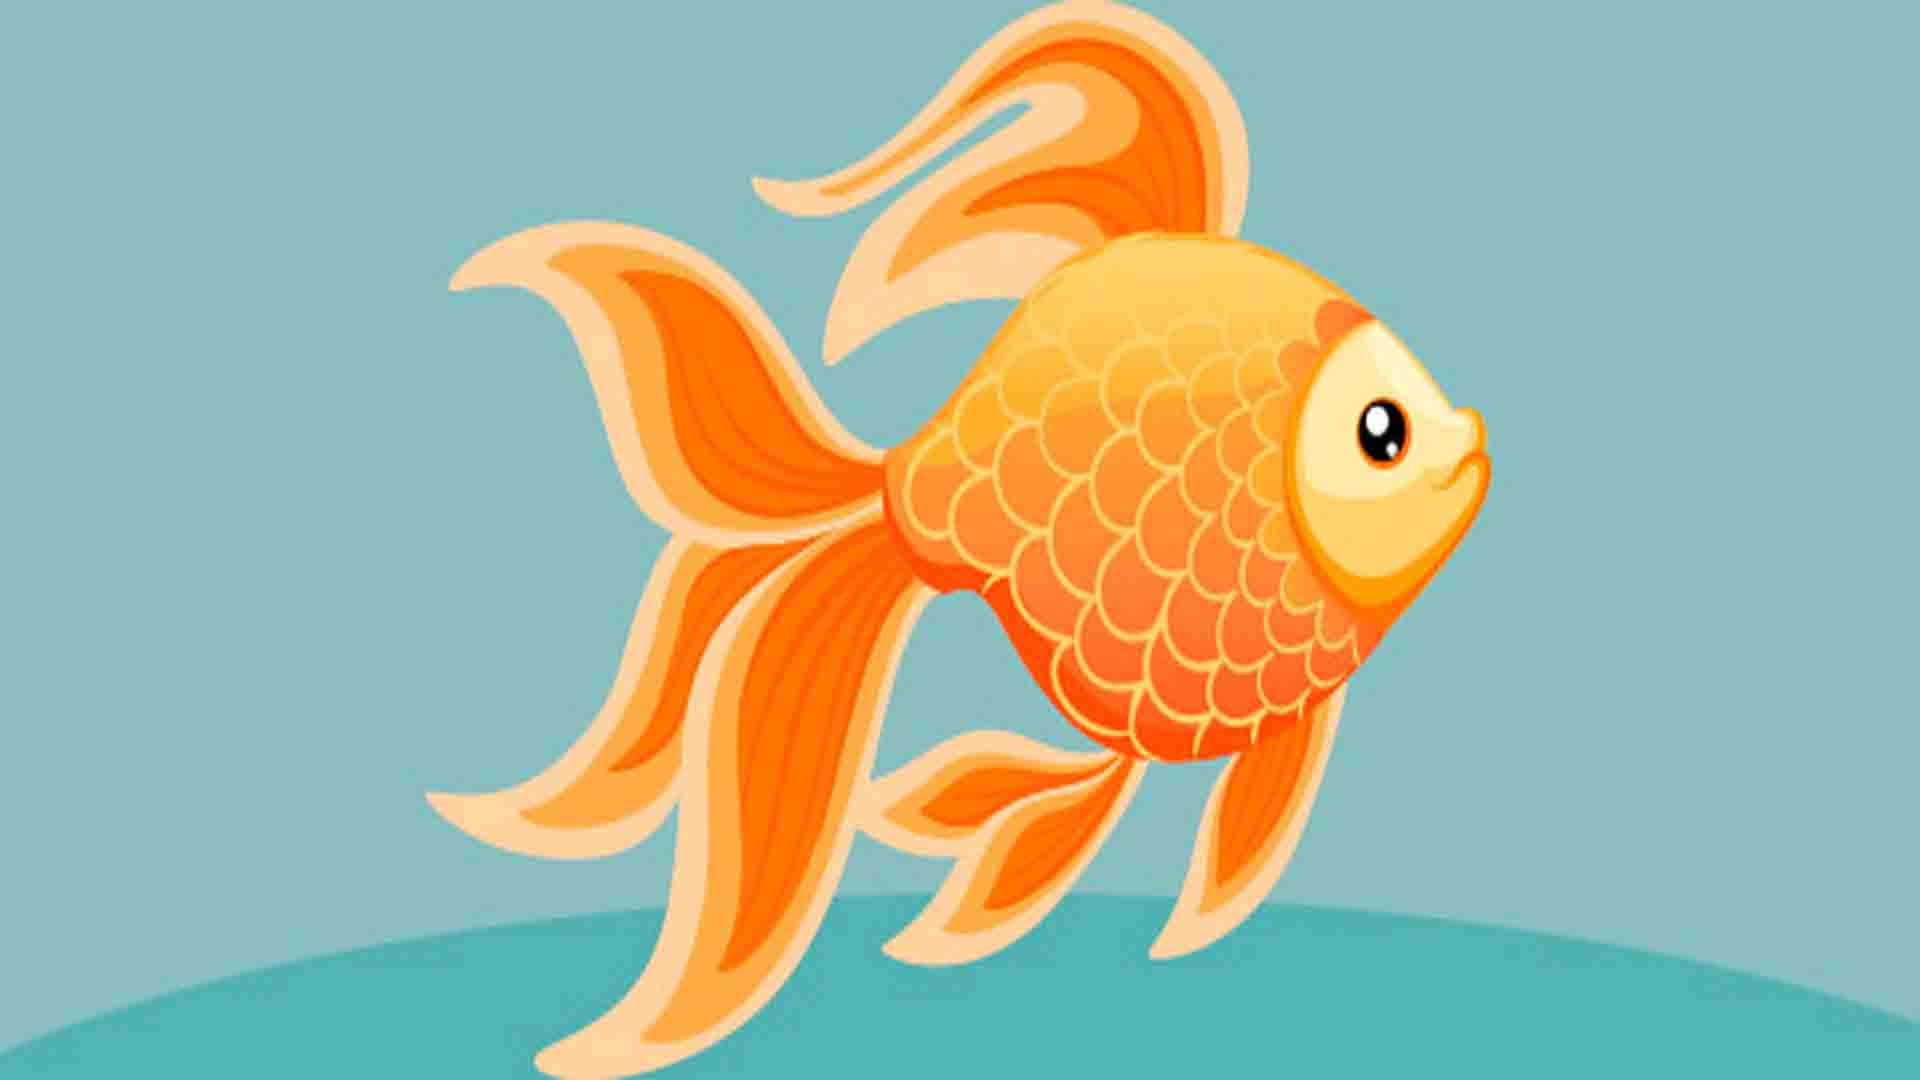 The gold fish a long stories for kids | Long Stories in English